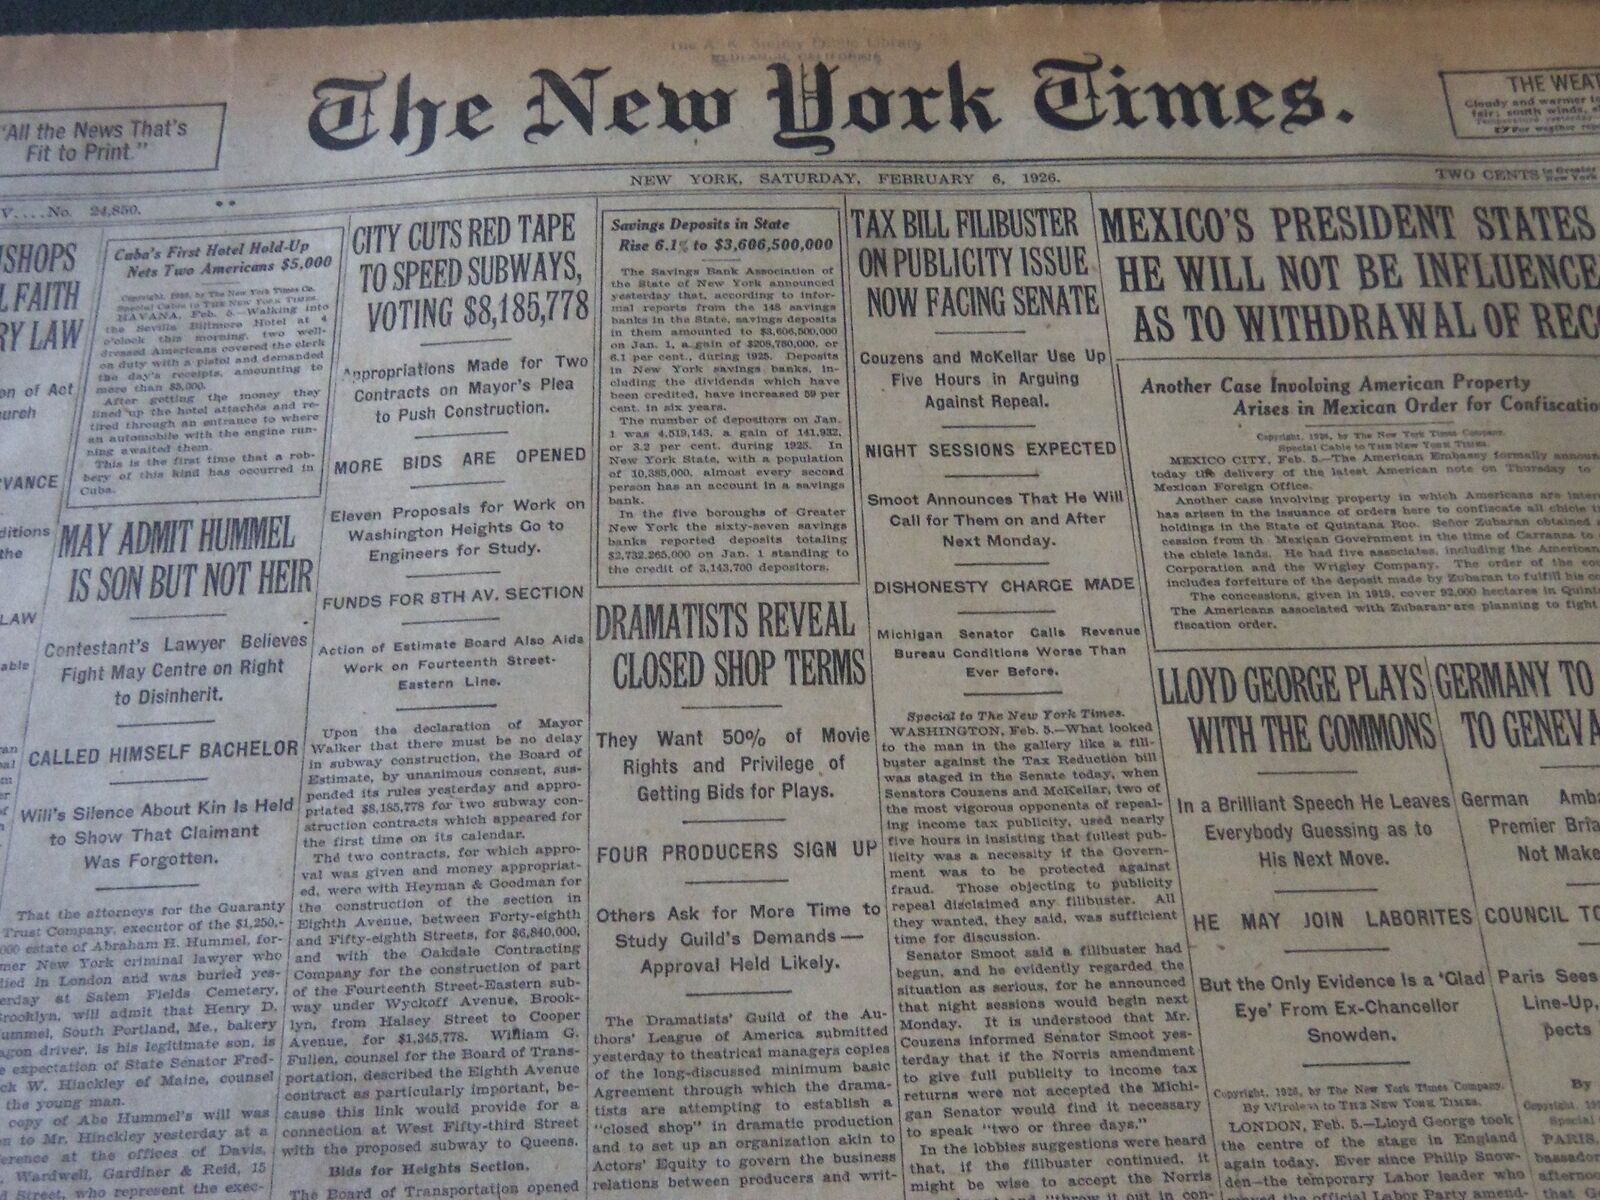 1926 FEBRUARY 6 NEW YORK TIMES - DRAMATISTS REVEAL CLOSED SHOP TERMS - NT 6609